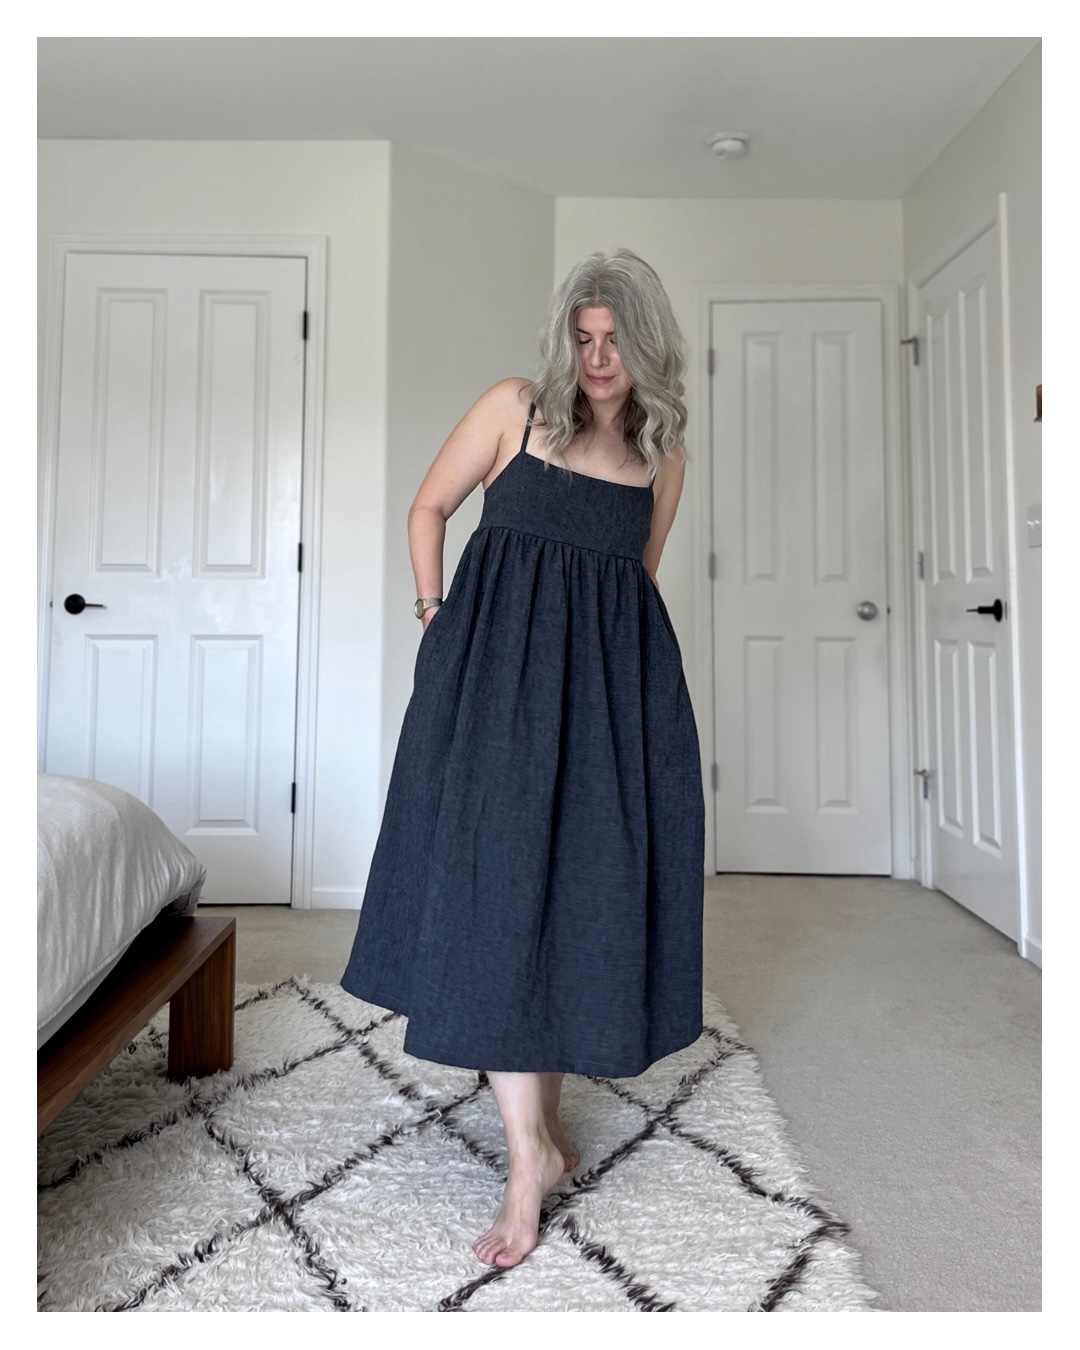 Sewing My Own Clothes: How I Made The Peony Dress - Uncomplicated Spaces